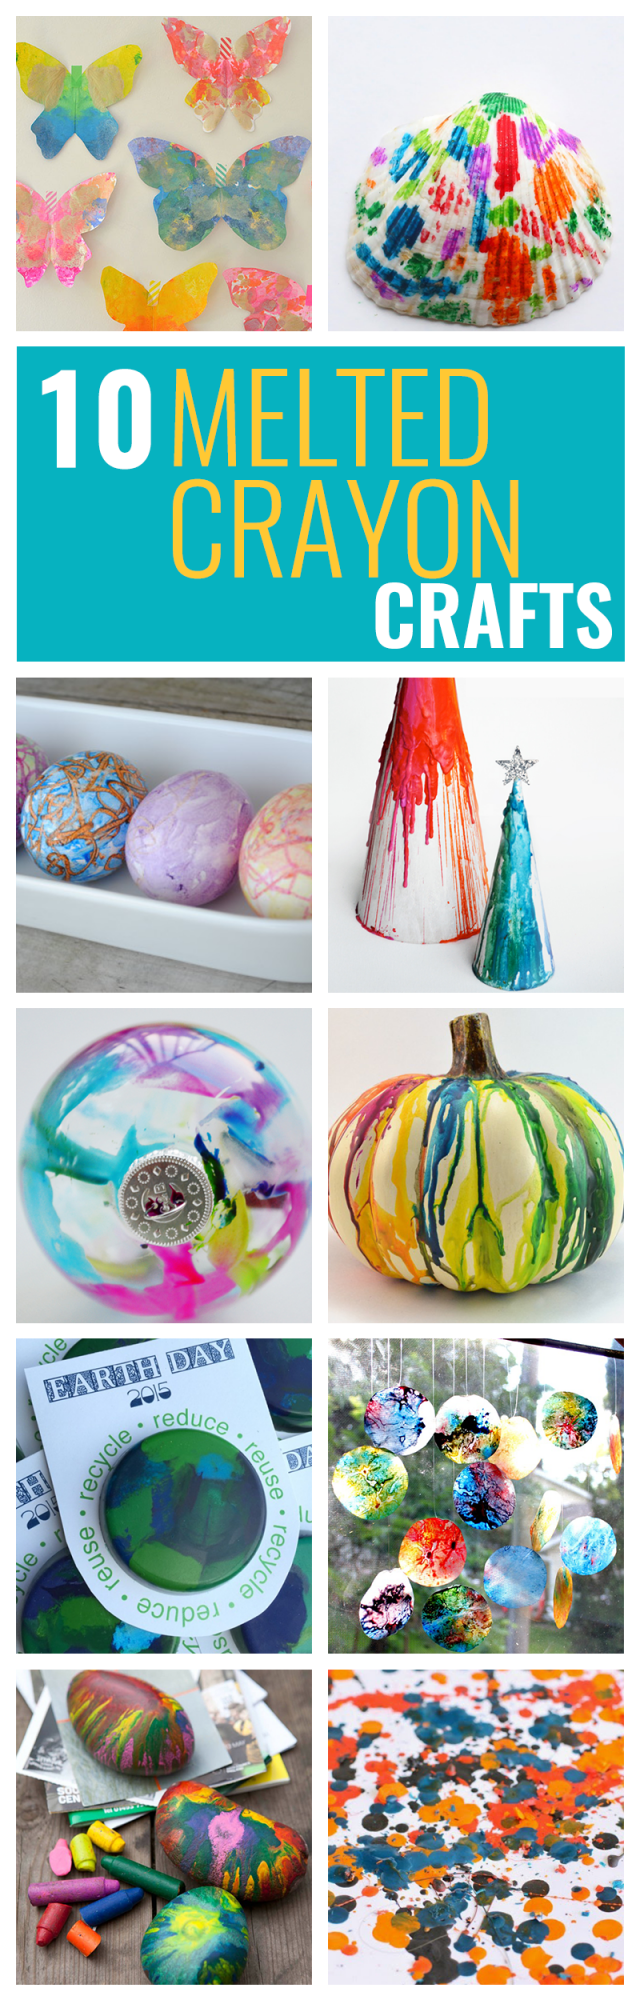 10 Melted Crayon Craft Projects